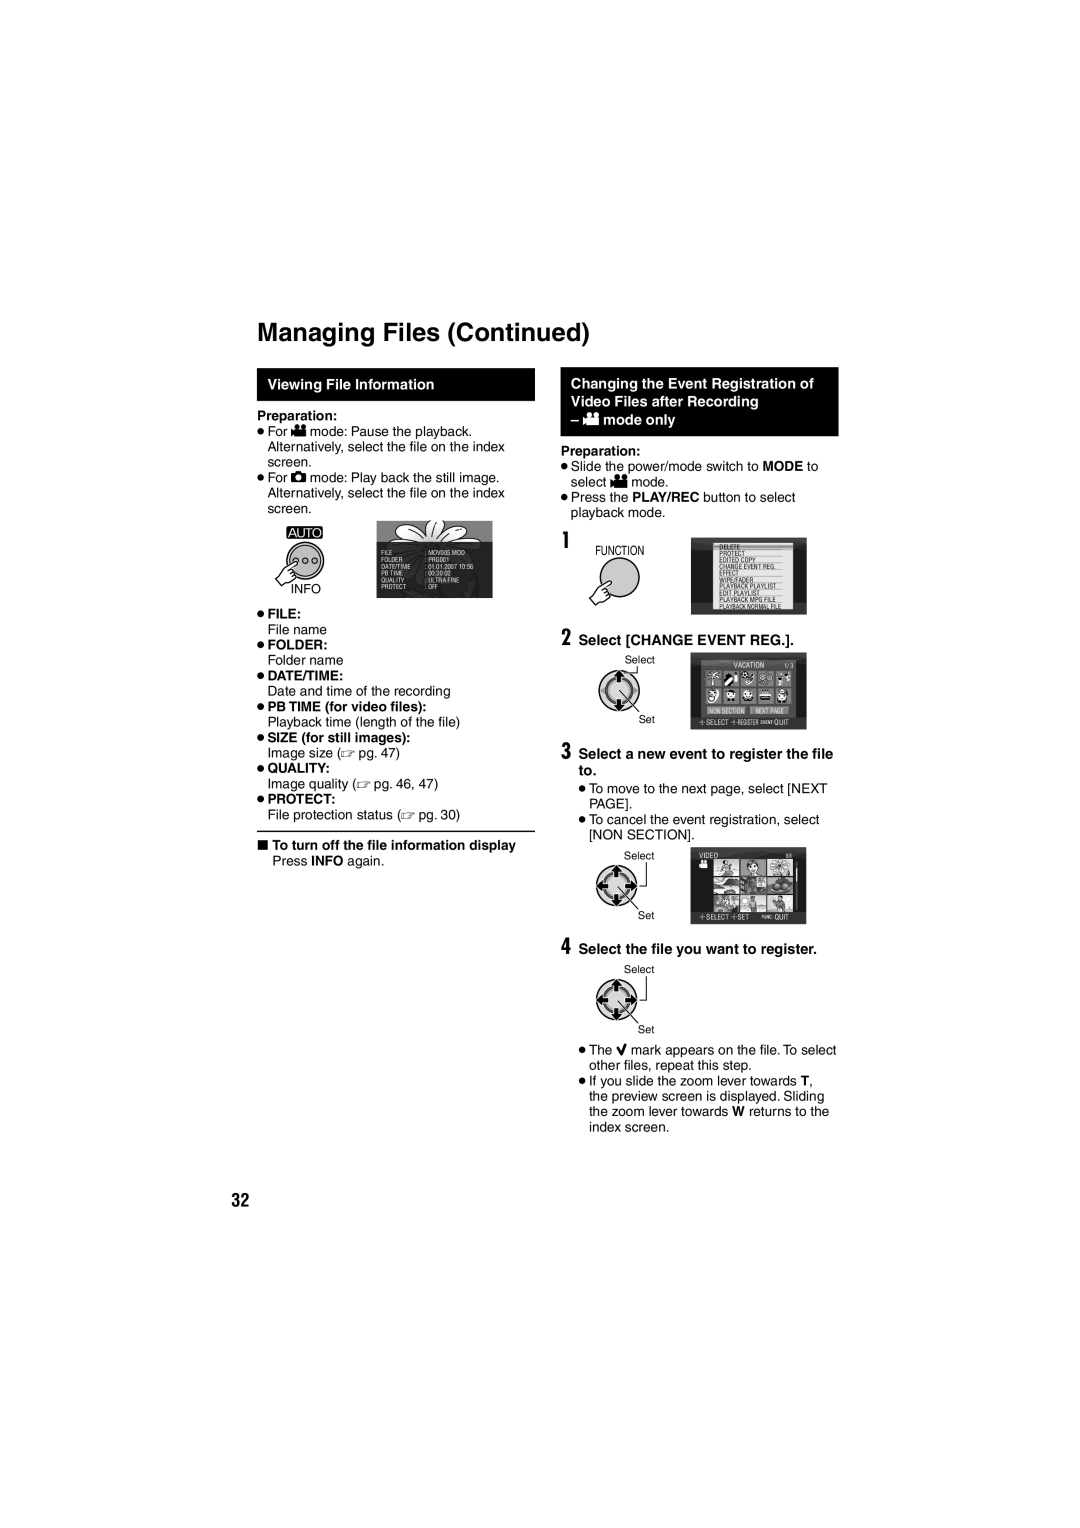 JVC GZ-MG130E/EK Managing Files Continued, Viewing File Information, mode only, Select CHANGE EVENT REG, Preparation 